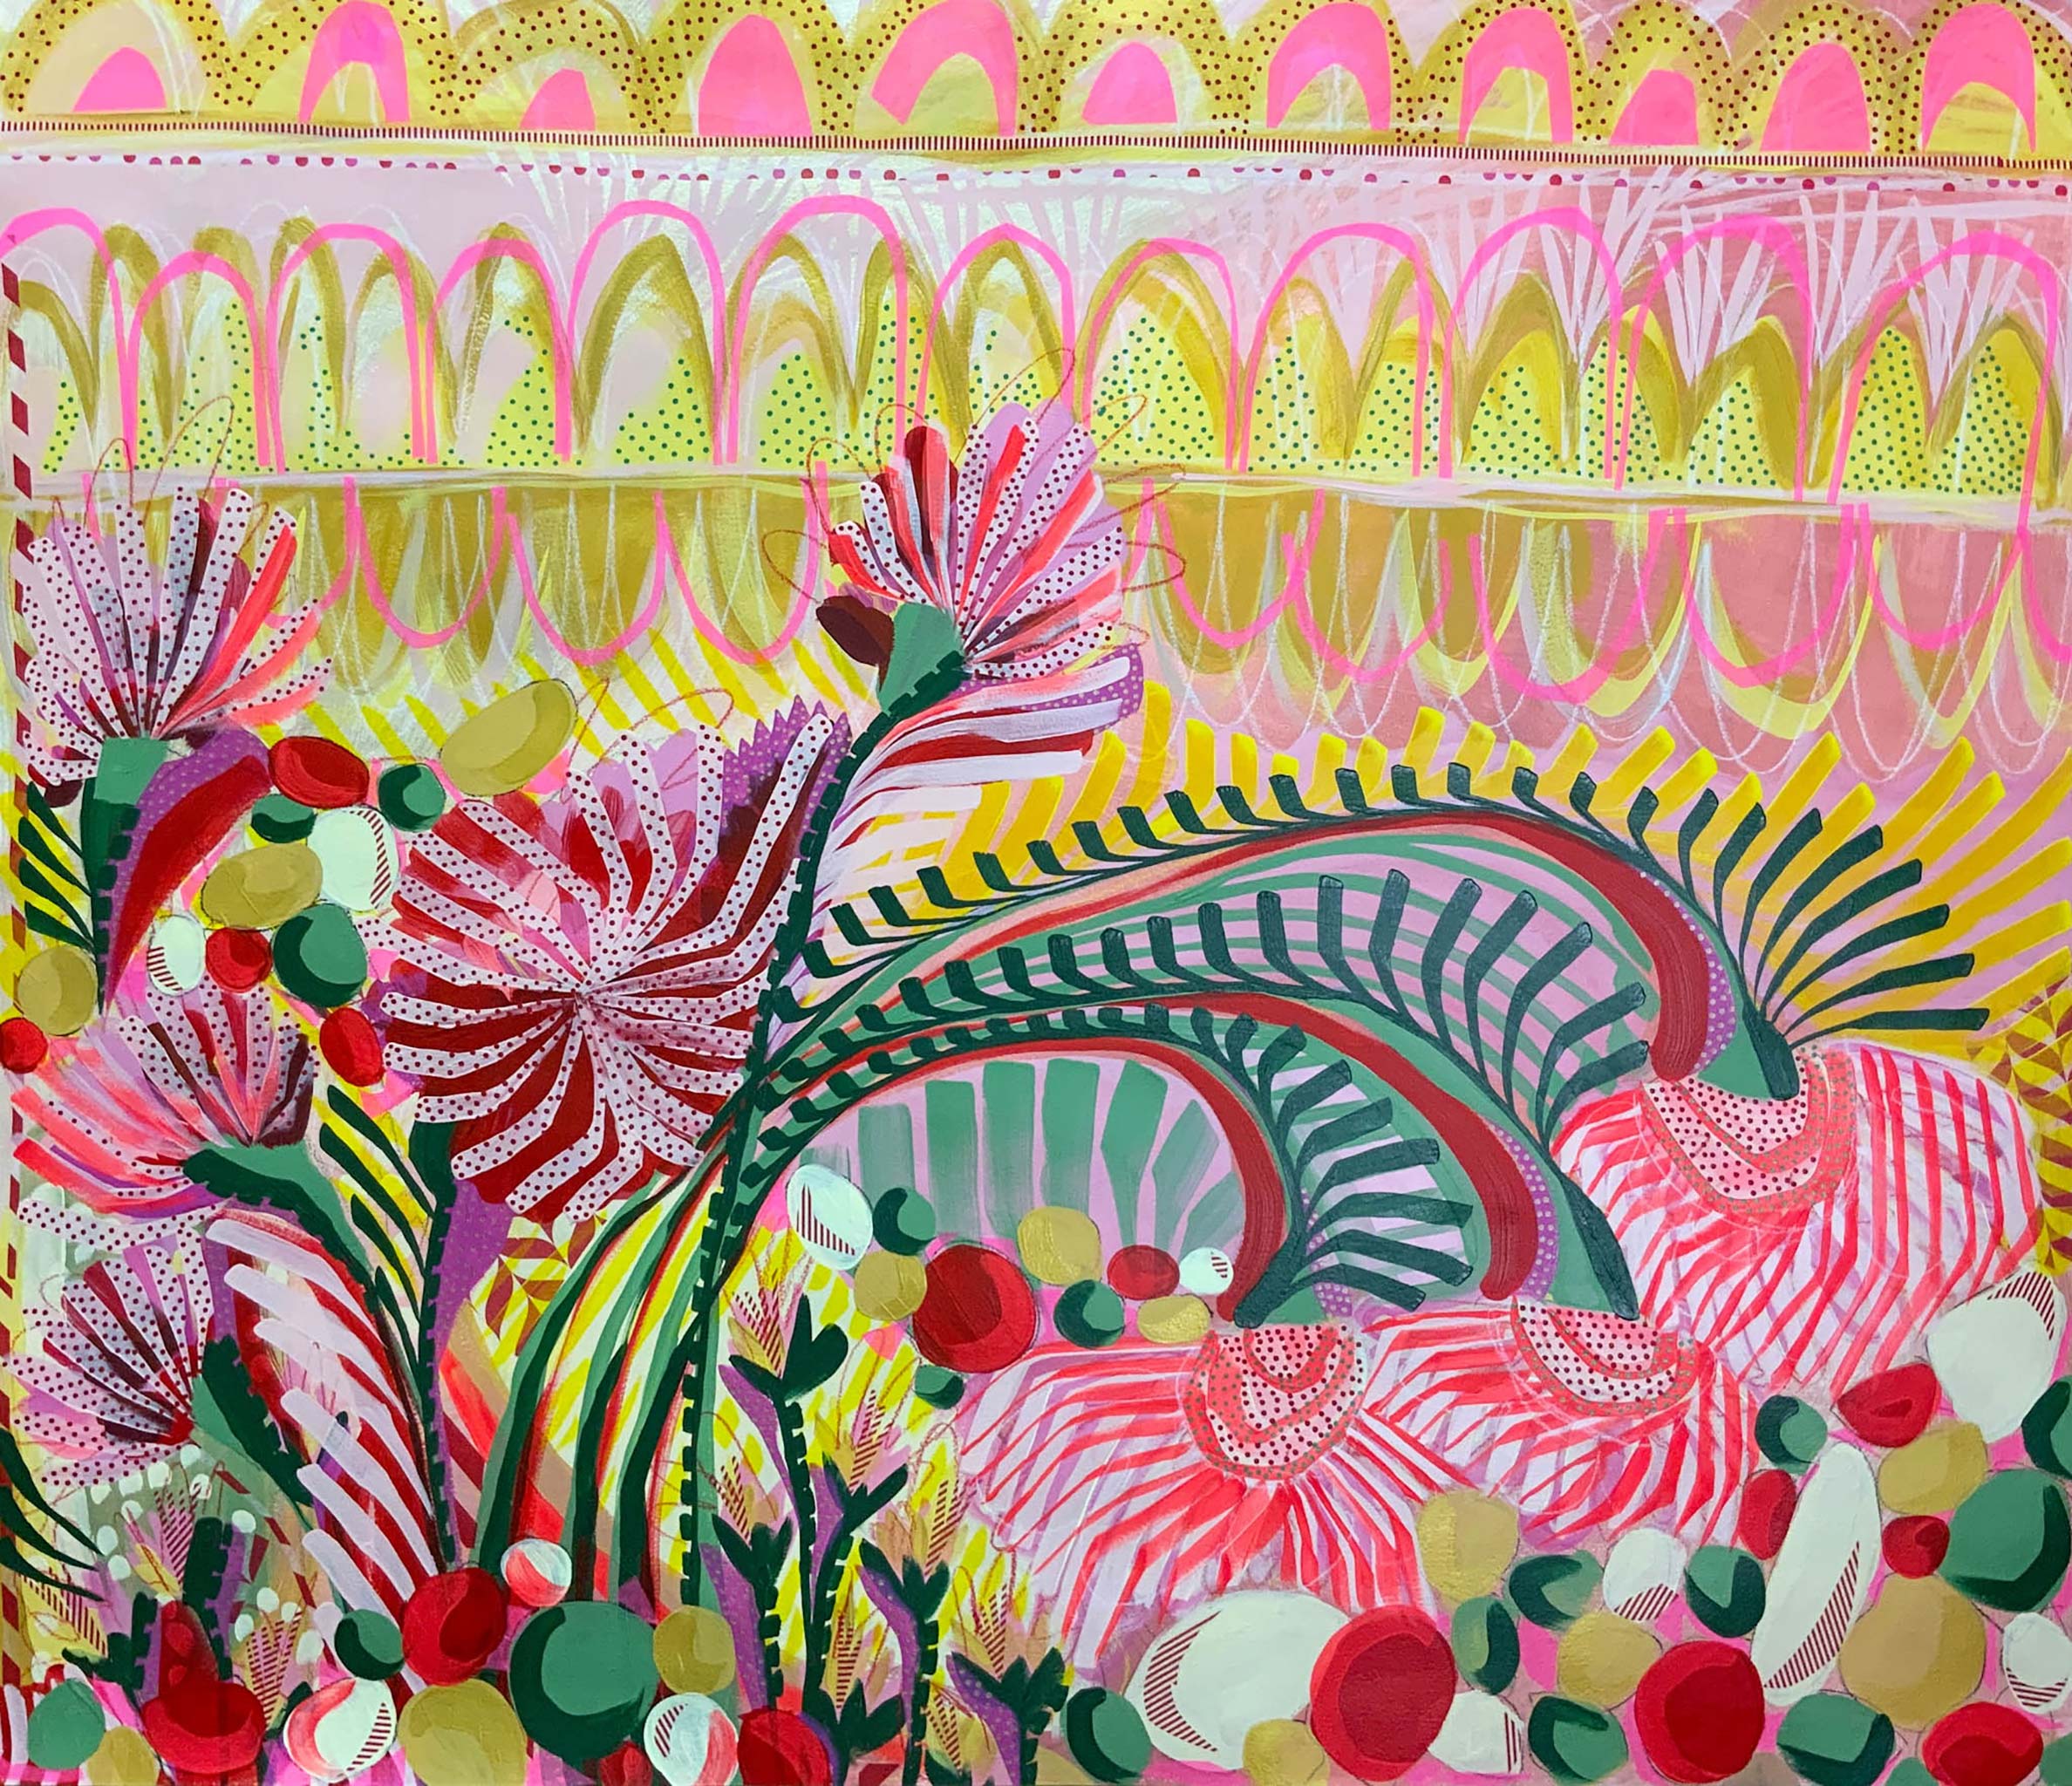 Abstract, pink and yellow floral with print and pattern design influences.